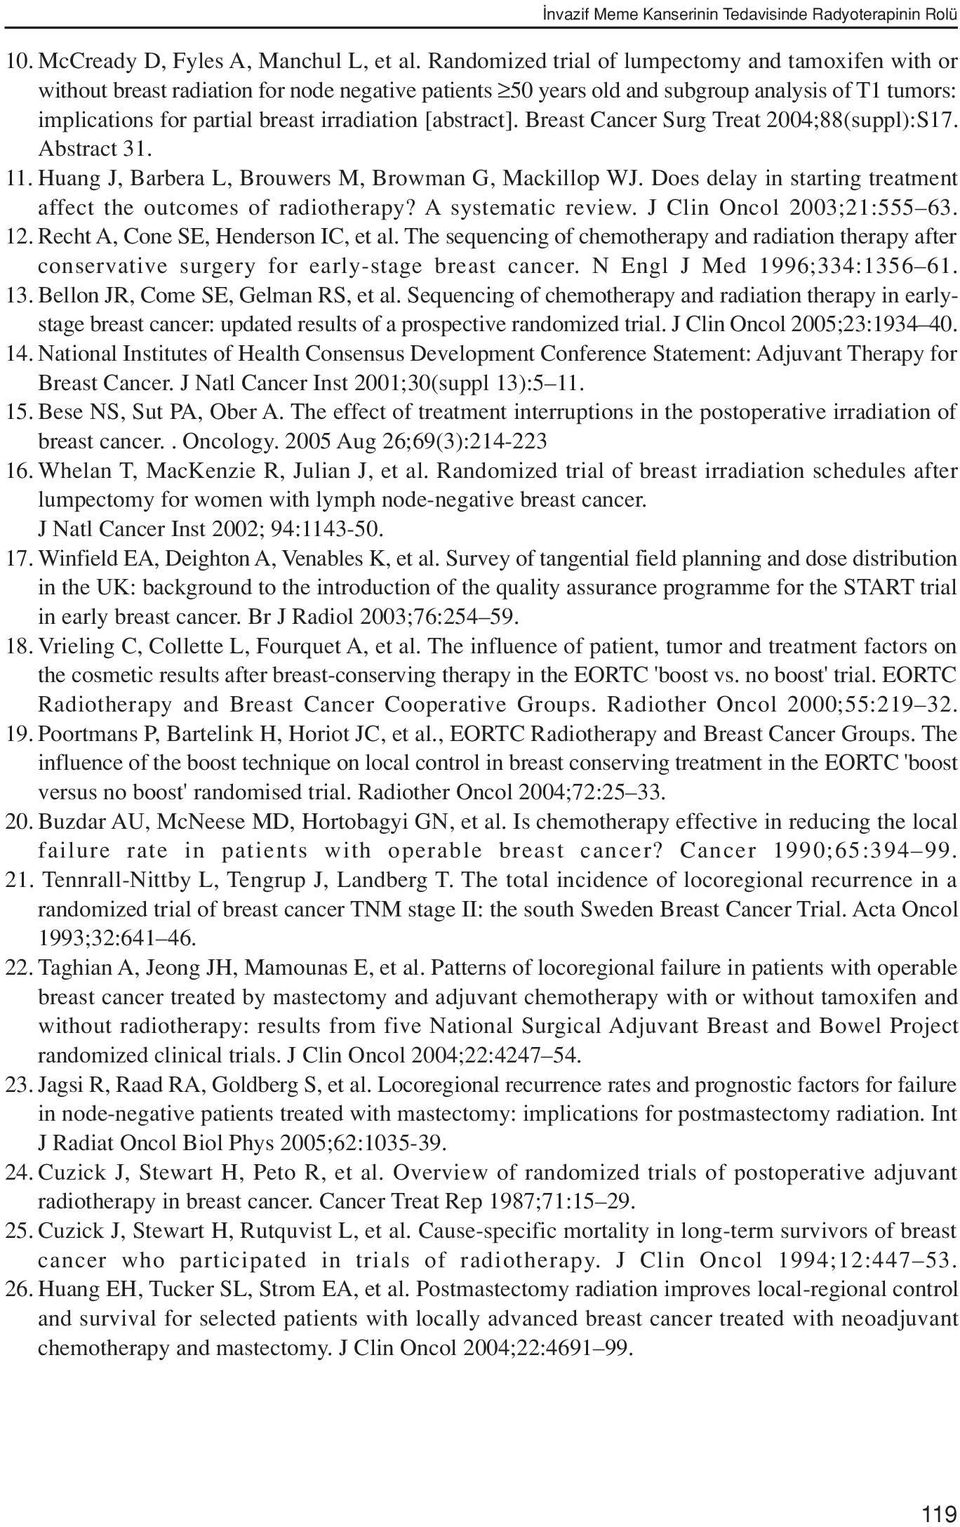 [abstract]. Breast Cancer Surg Treat 2004;88(suppl):S17. Abstract 31. 11. Huang J, Barbera L, Brouwers M, Browman G, Mackillop WJ. Does delay in starting treatment affect the outcomes of radiotherapy?